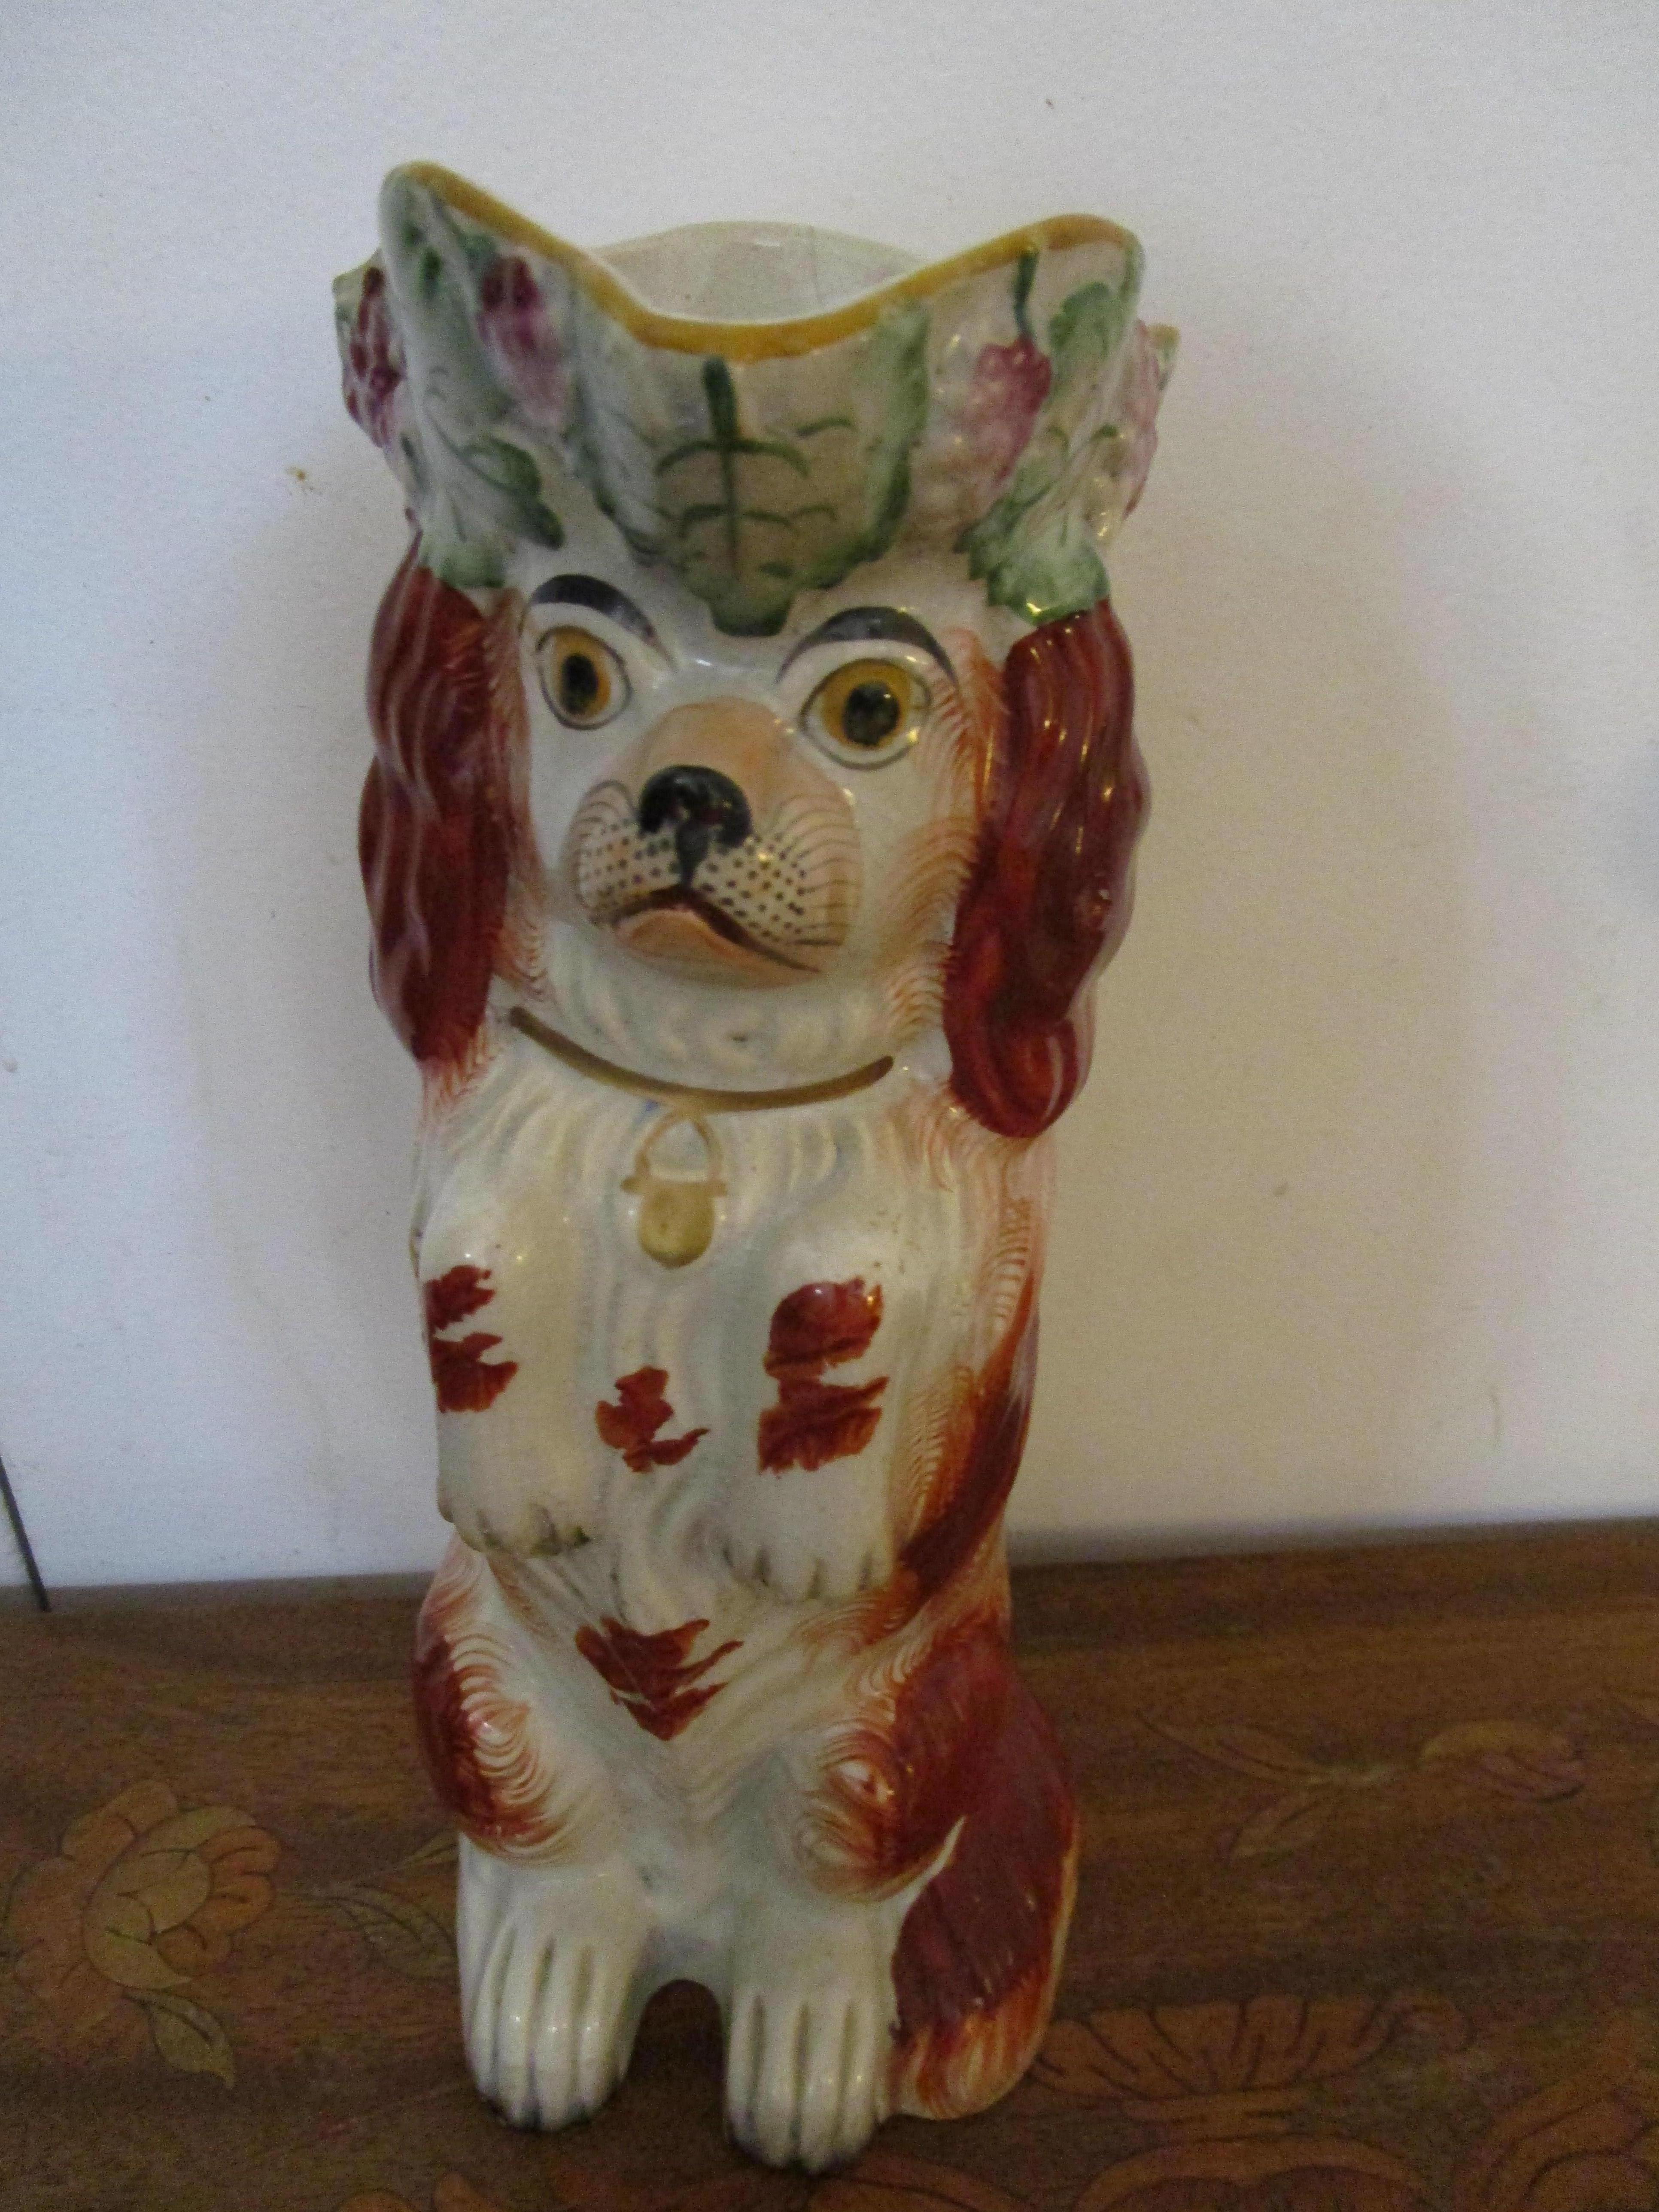 This Staffordshire Spaniel jug is impertinent, from his expression to his hopeful gaze. The eyes seem animated and almost lifelike. This jug is in excellent condition with bright red, white and green and gilt touches in the form of the pup's gold